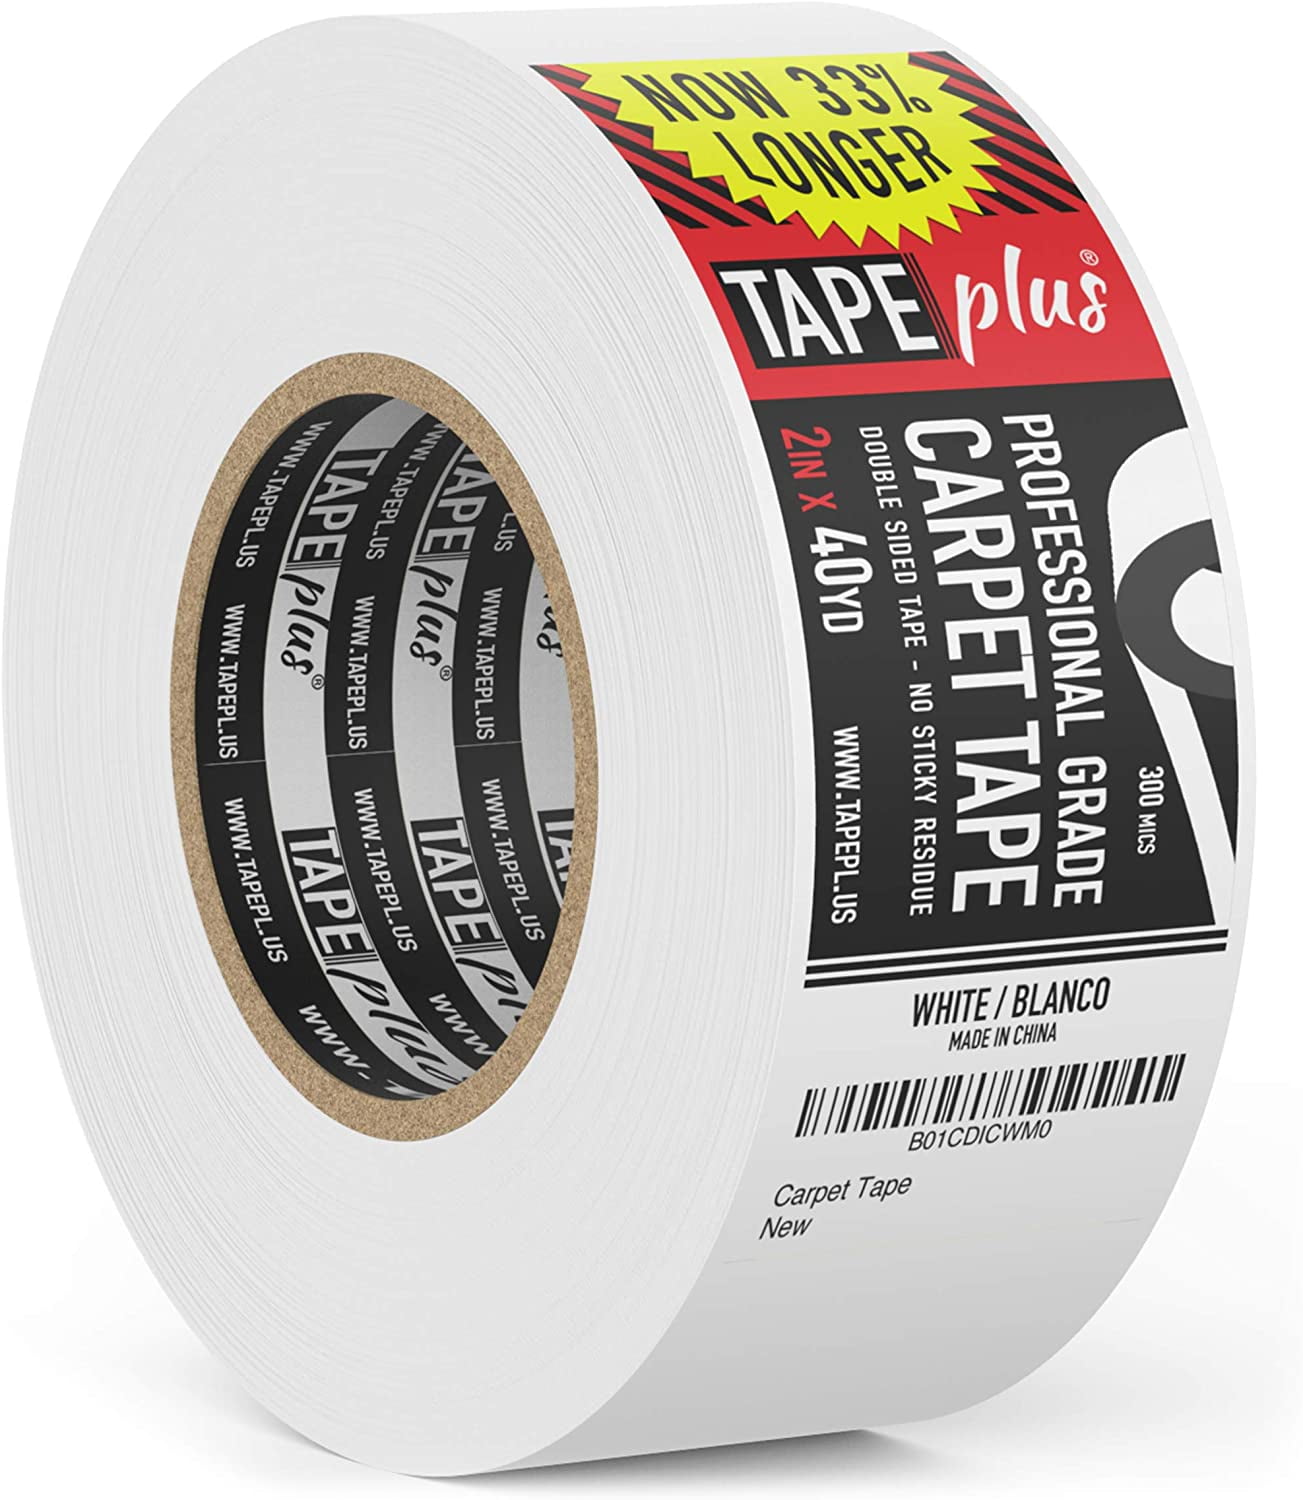 Professional Rug Tape - 2 Inch by 40 Yards (120 Feet! - 2X More!) - Double  Sided Non-Slip Carpet Tape - Premium White Finish - Perfect Gripper for